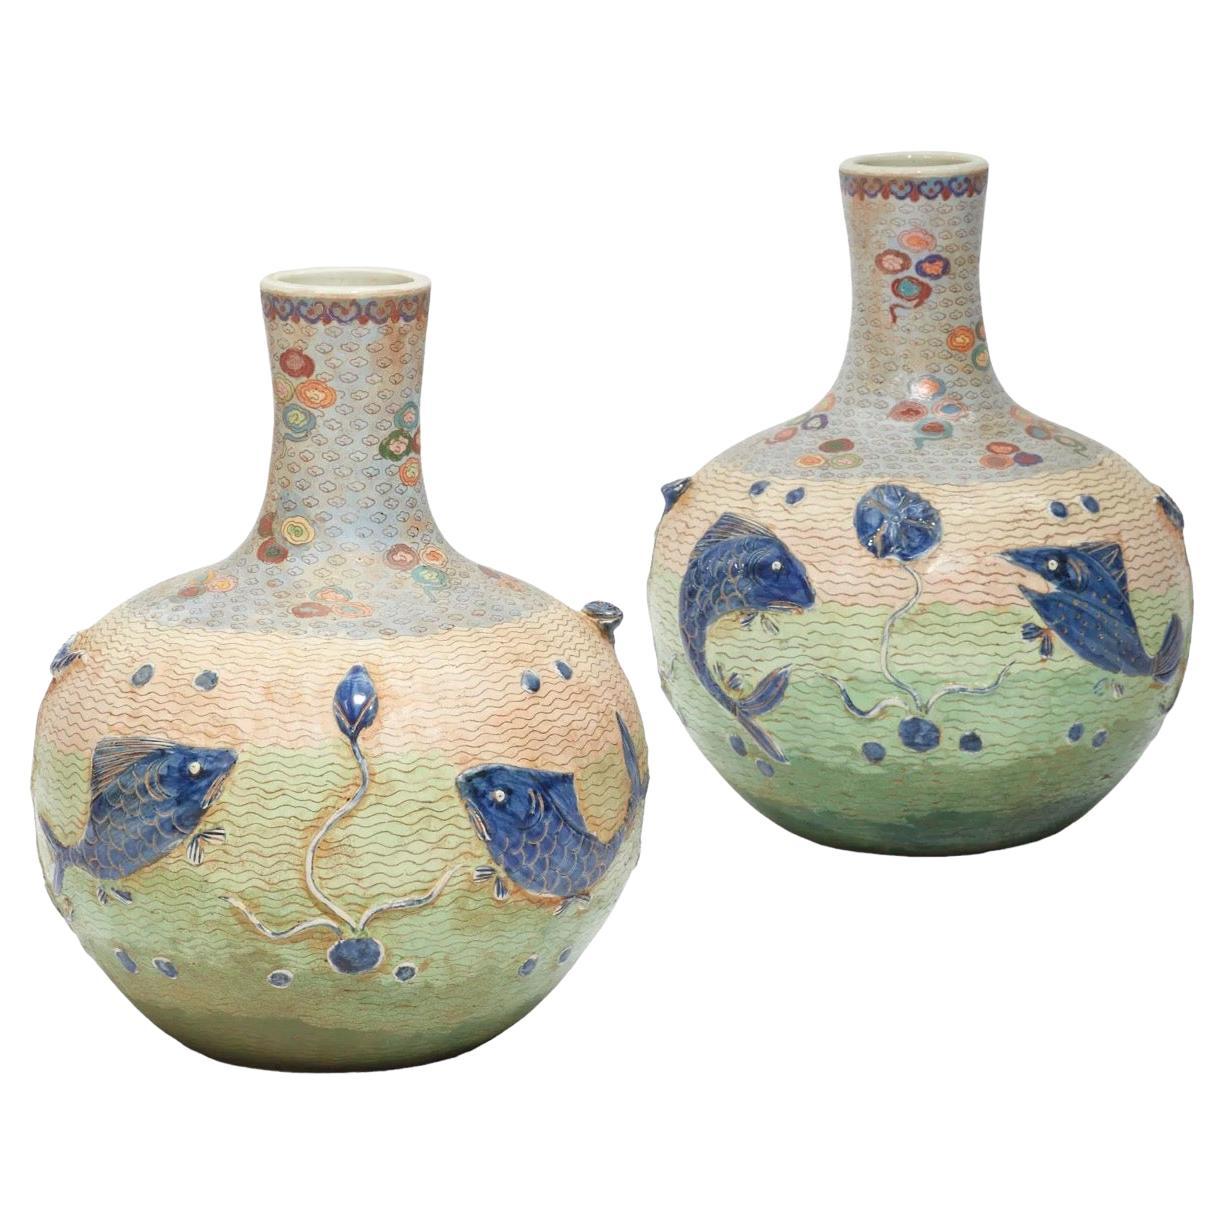 Pair of Early 20th Century '1900s' Chinese Cloisonné Enameled Porcelain Vases For Sale